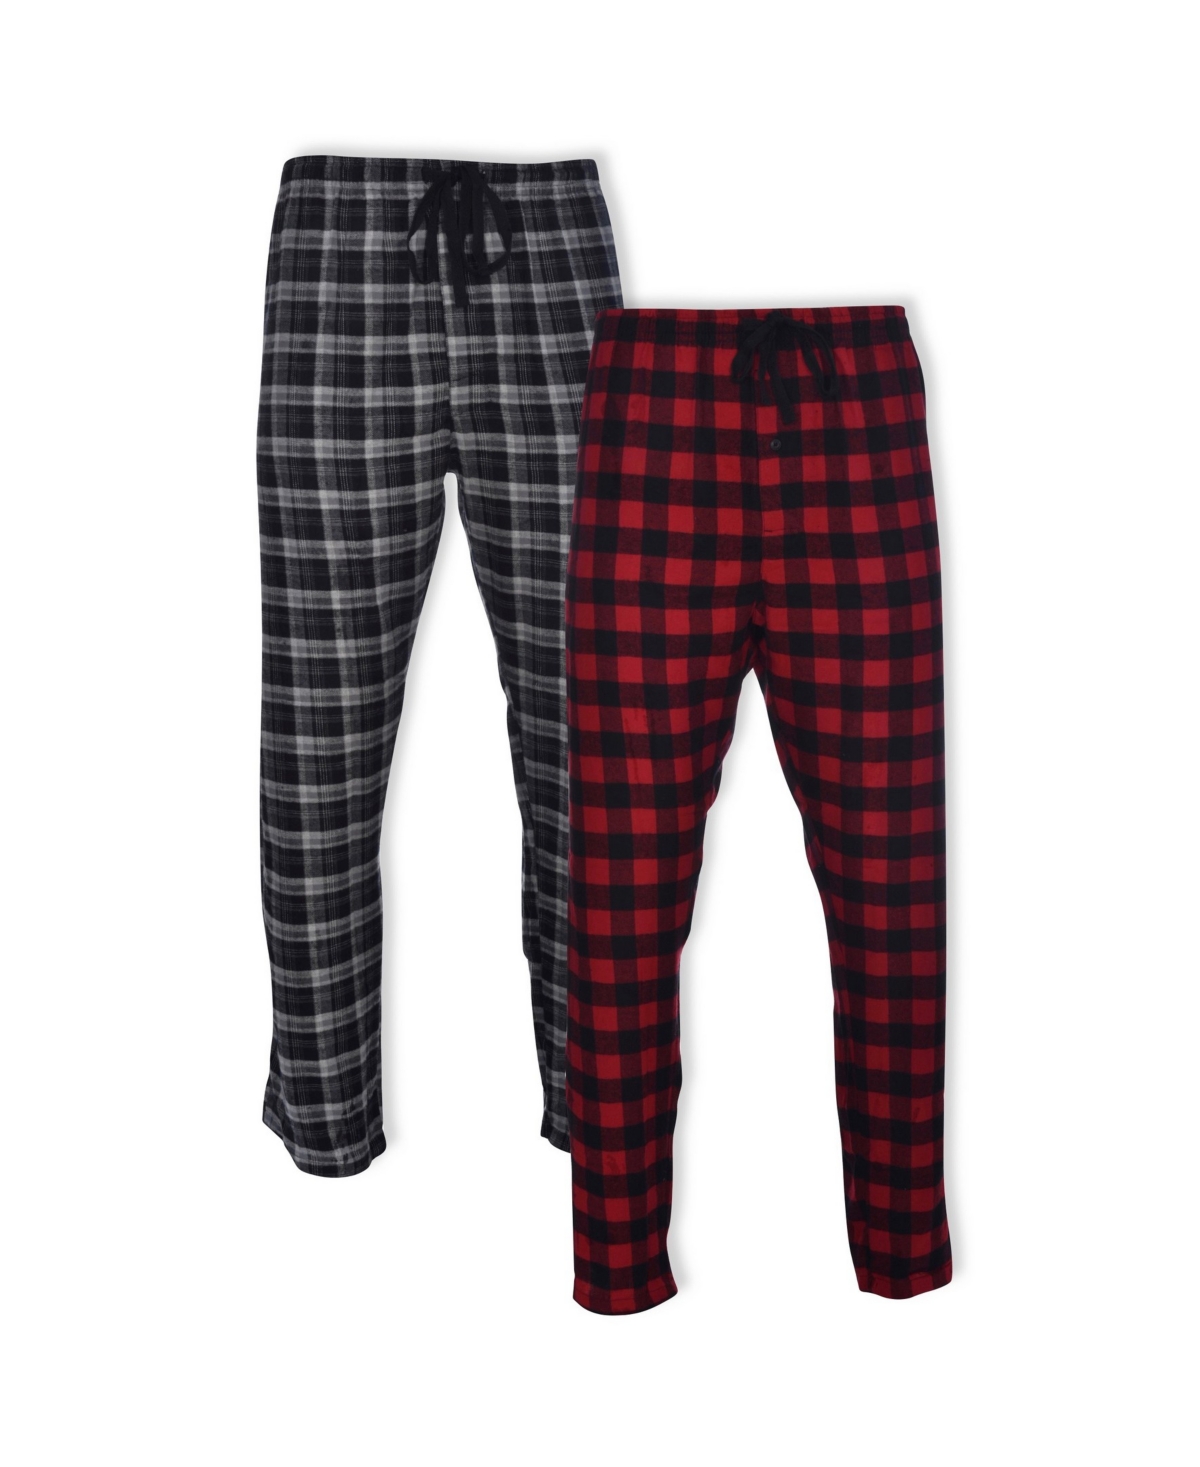 Hanes Platinum Hanes Men's Big and Tall Flannel Sleep Pant, 2 Pack